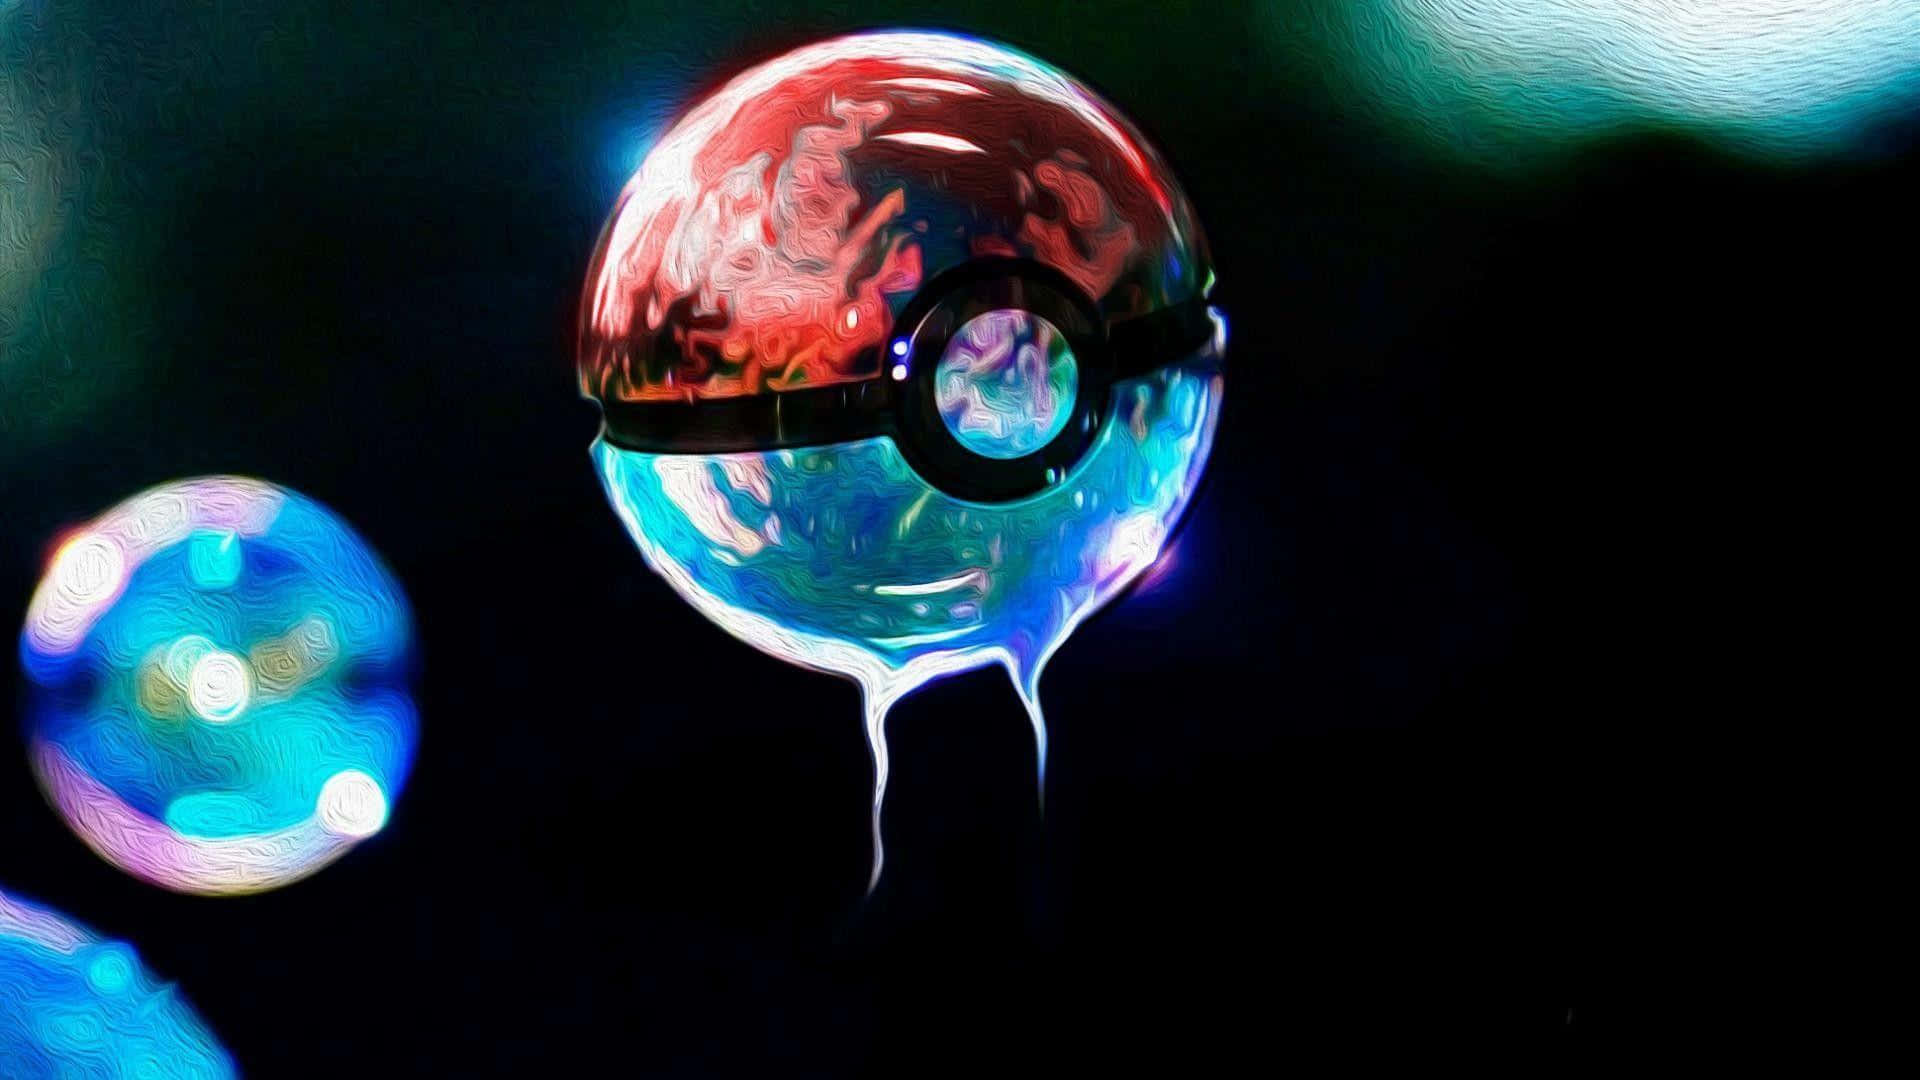 Captivating Pokeball Wallpaper for the Ultimate Pokemon Enthusiast